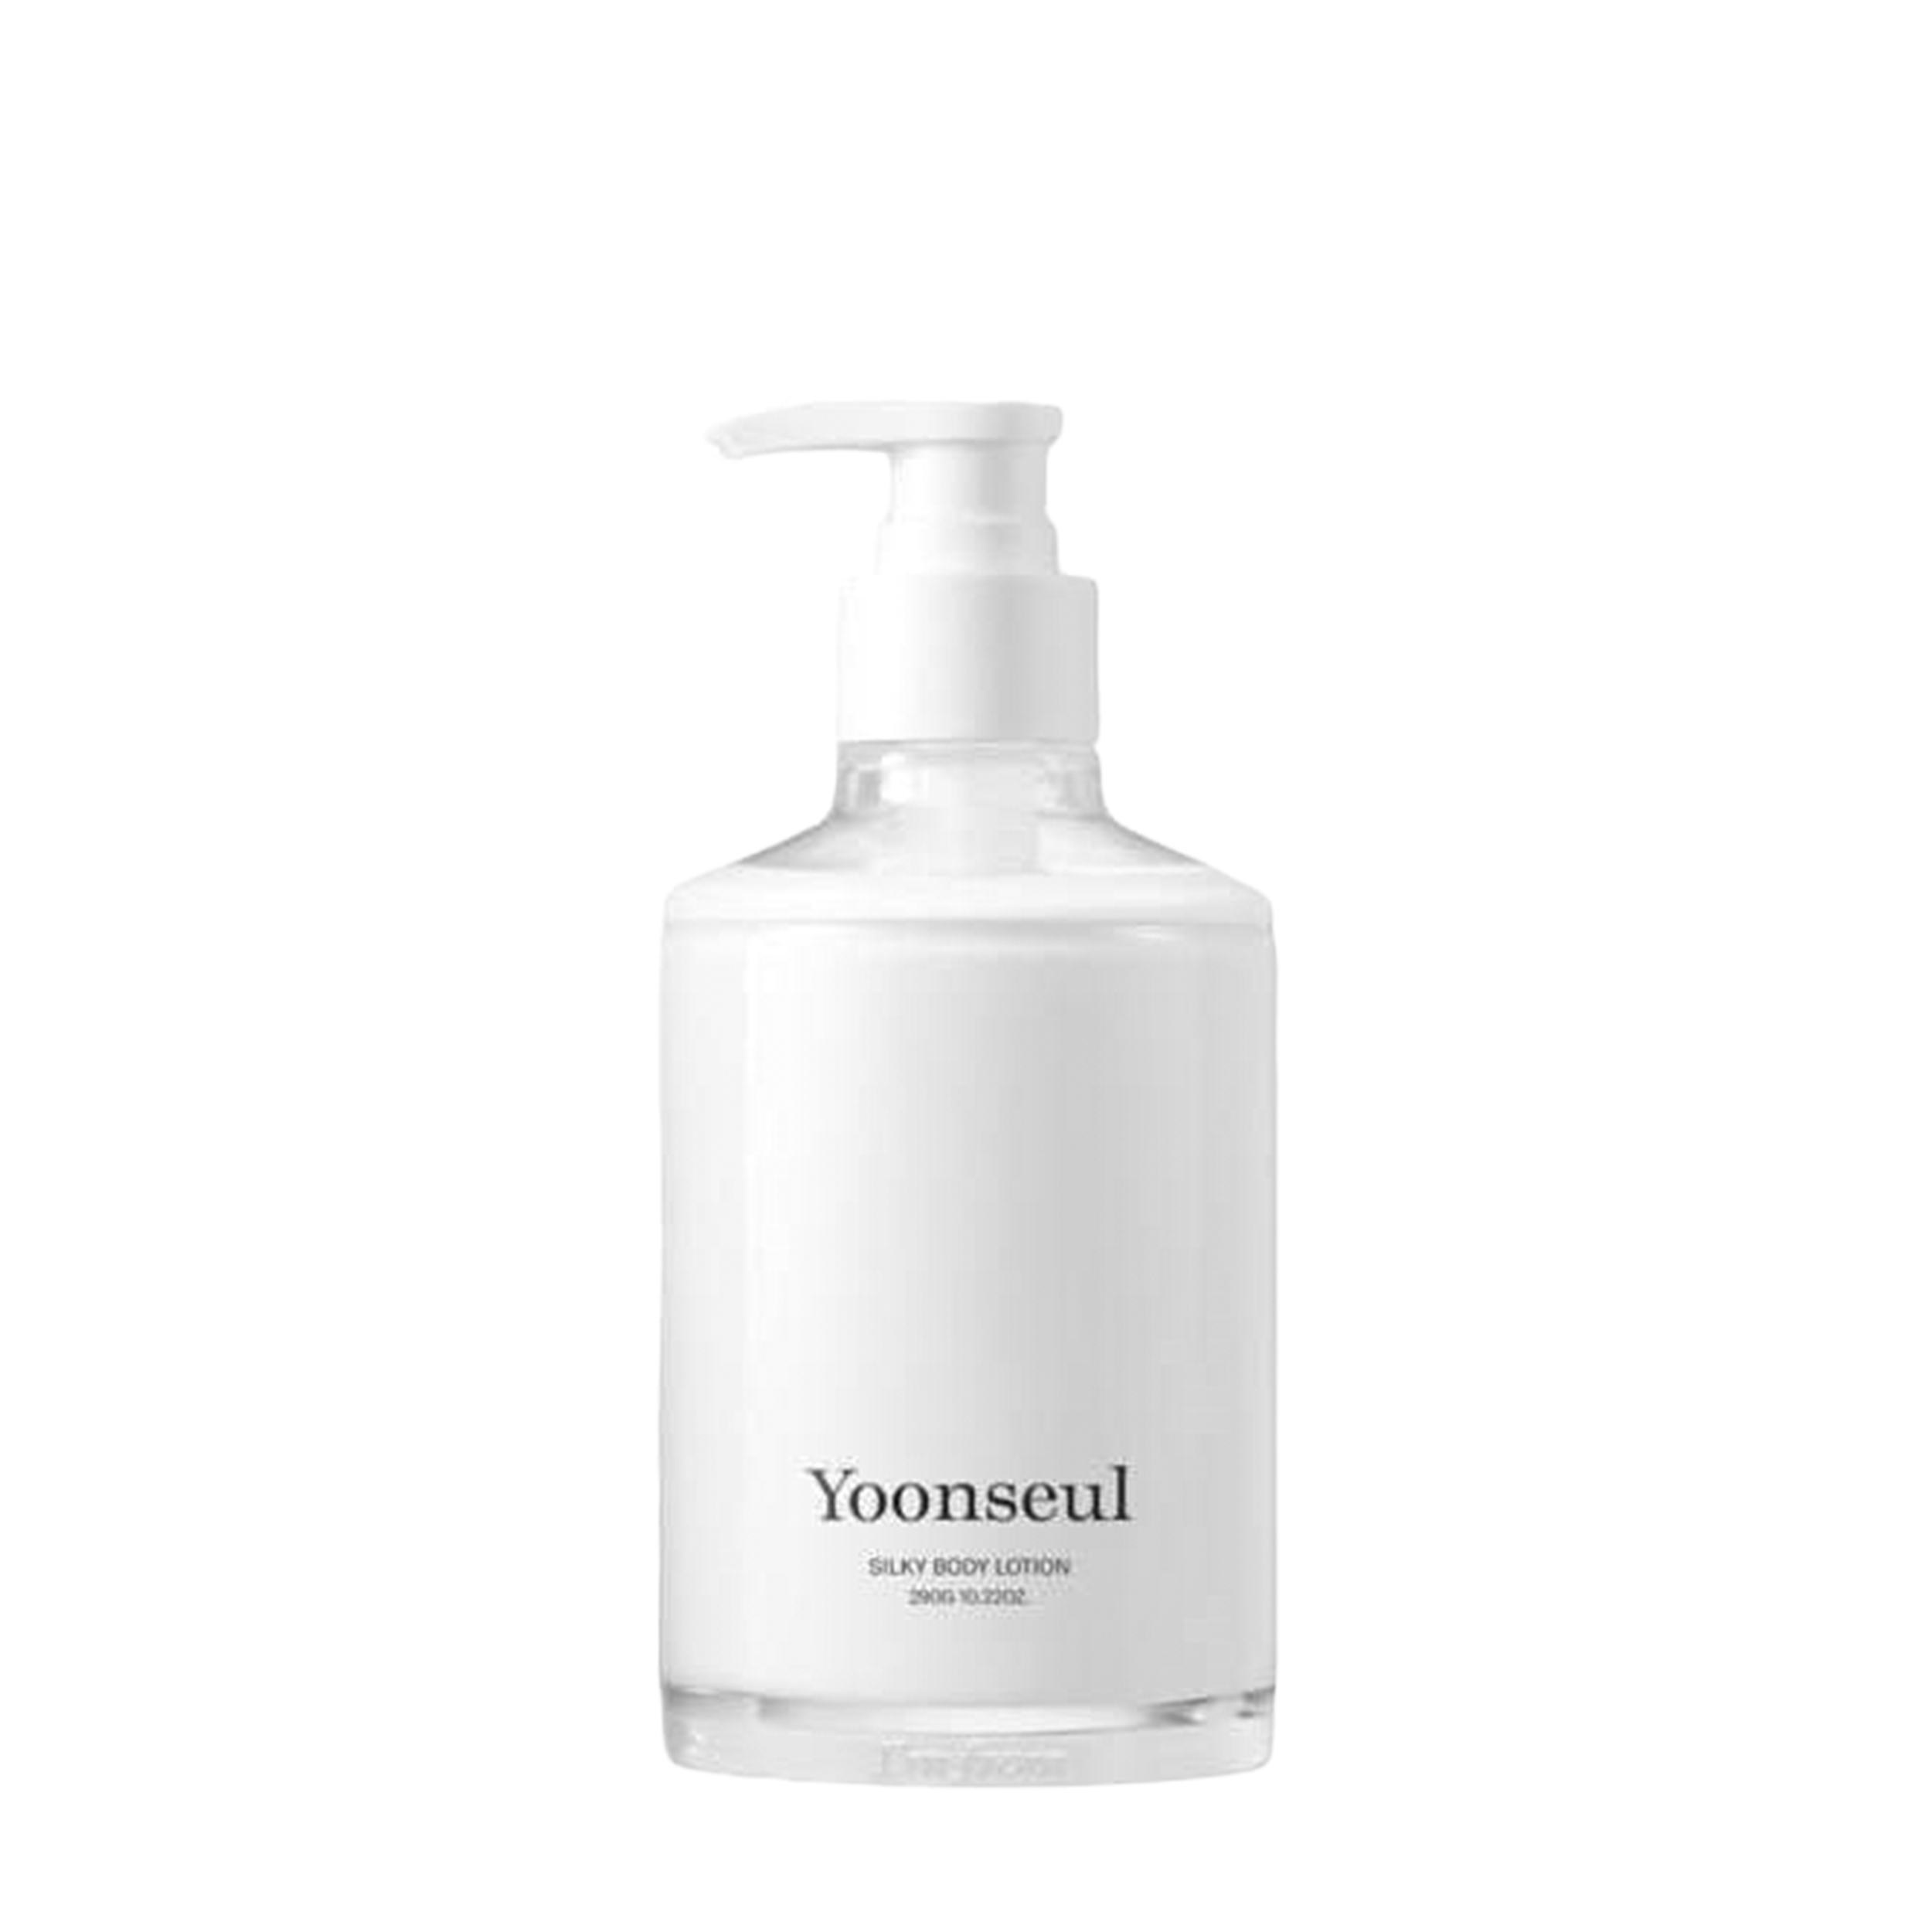 I’m from I’m from Шелковистый лосьон для тела I’m from Yoonseul Silky Body Lotion 290 гр АРТ-4882 - фото 1